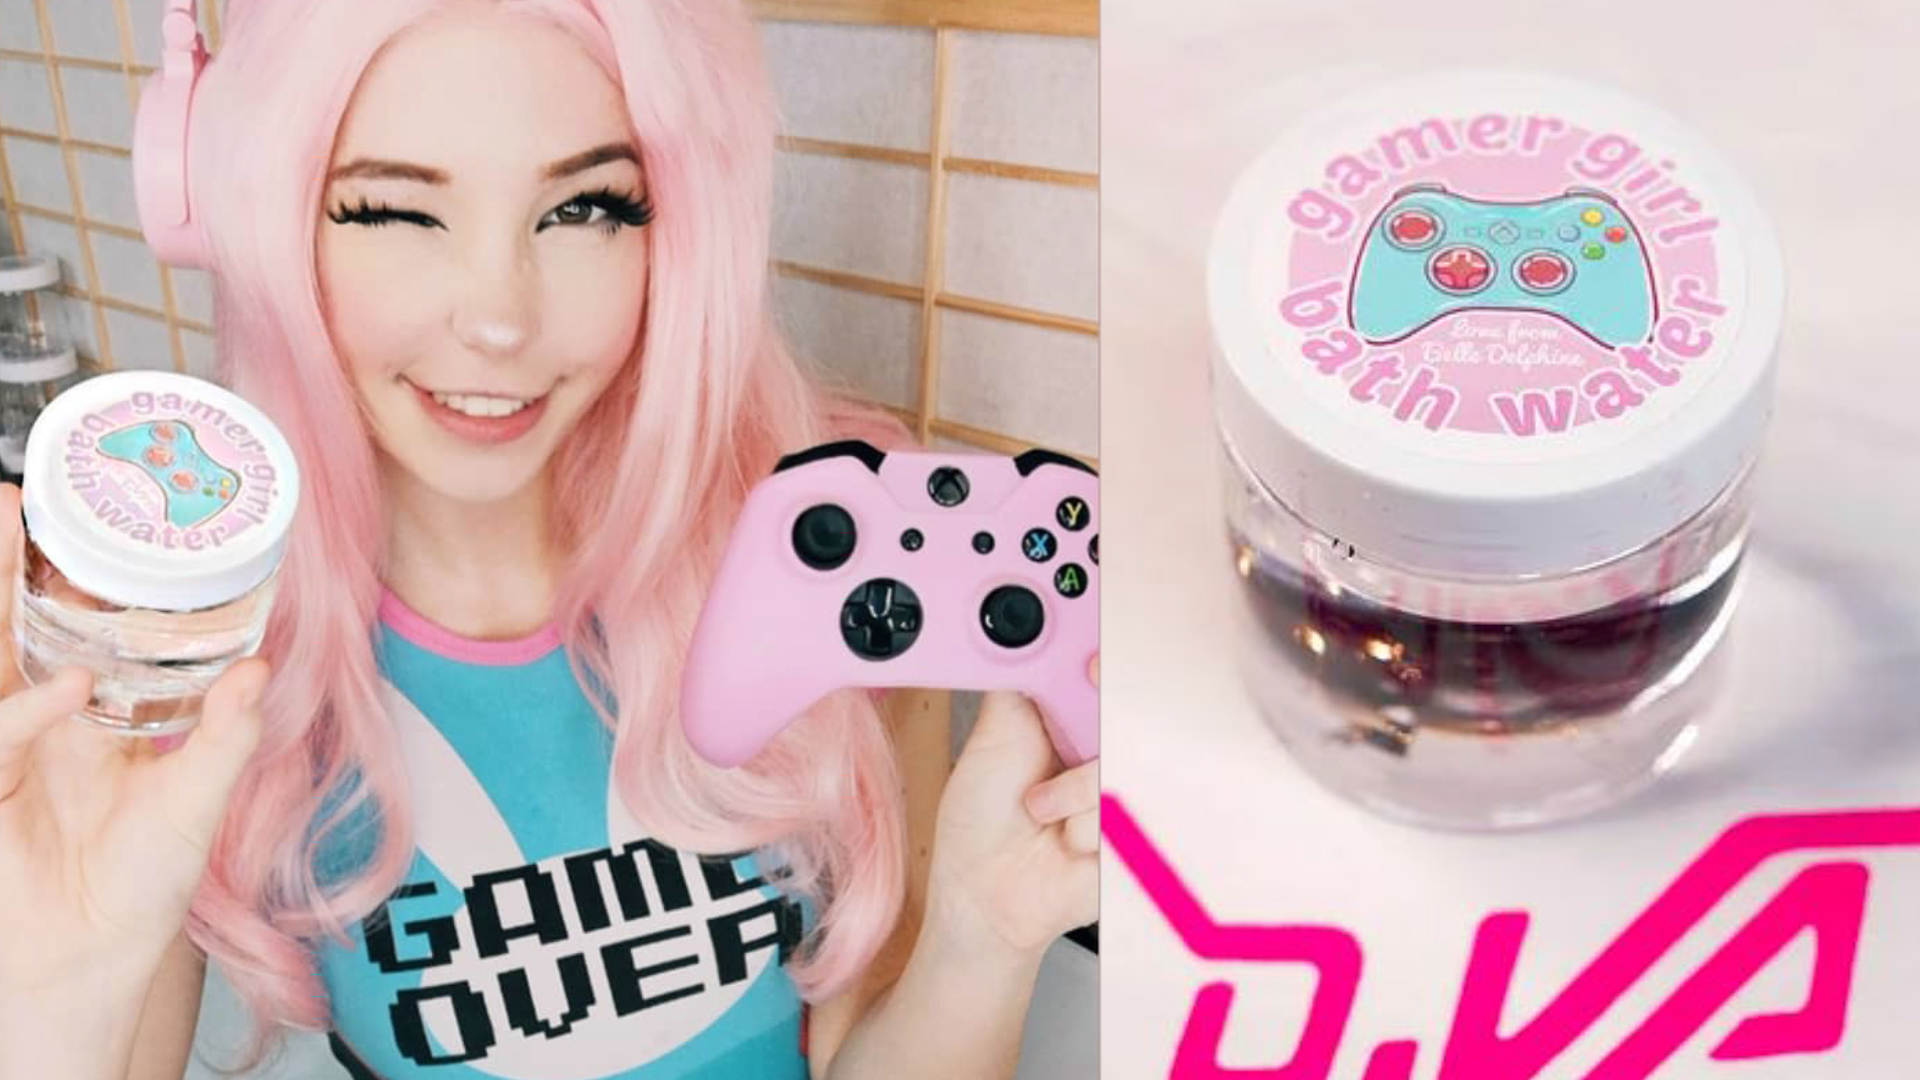 How much does belle delphine make